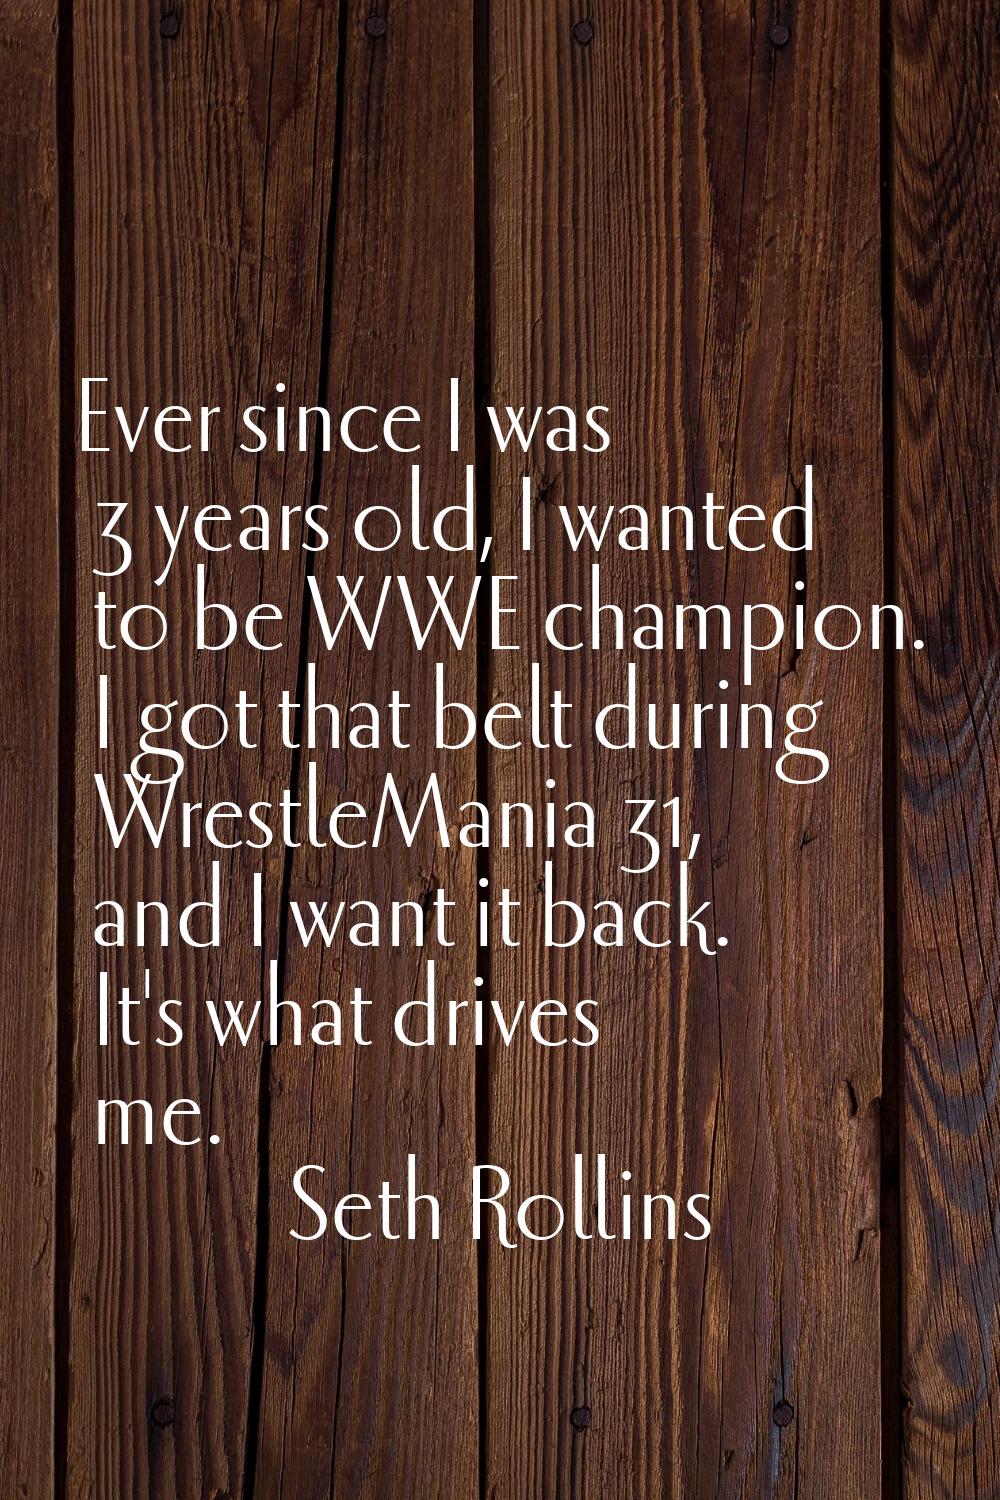 Ever since I was 3 years old, I wanted to be WWE champion. I got that belt during WrestleMania 31, 